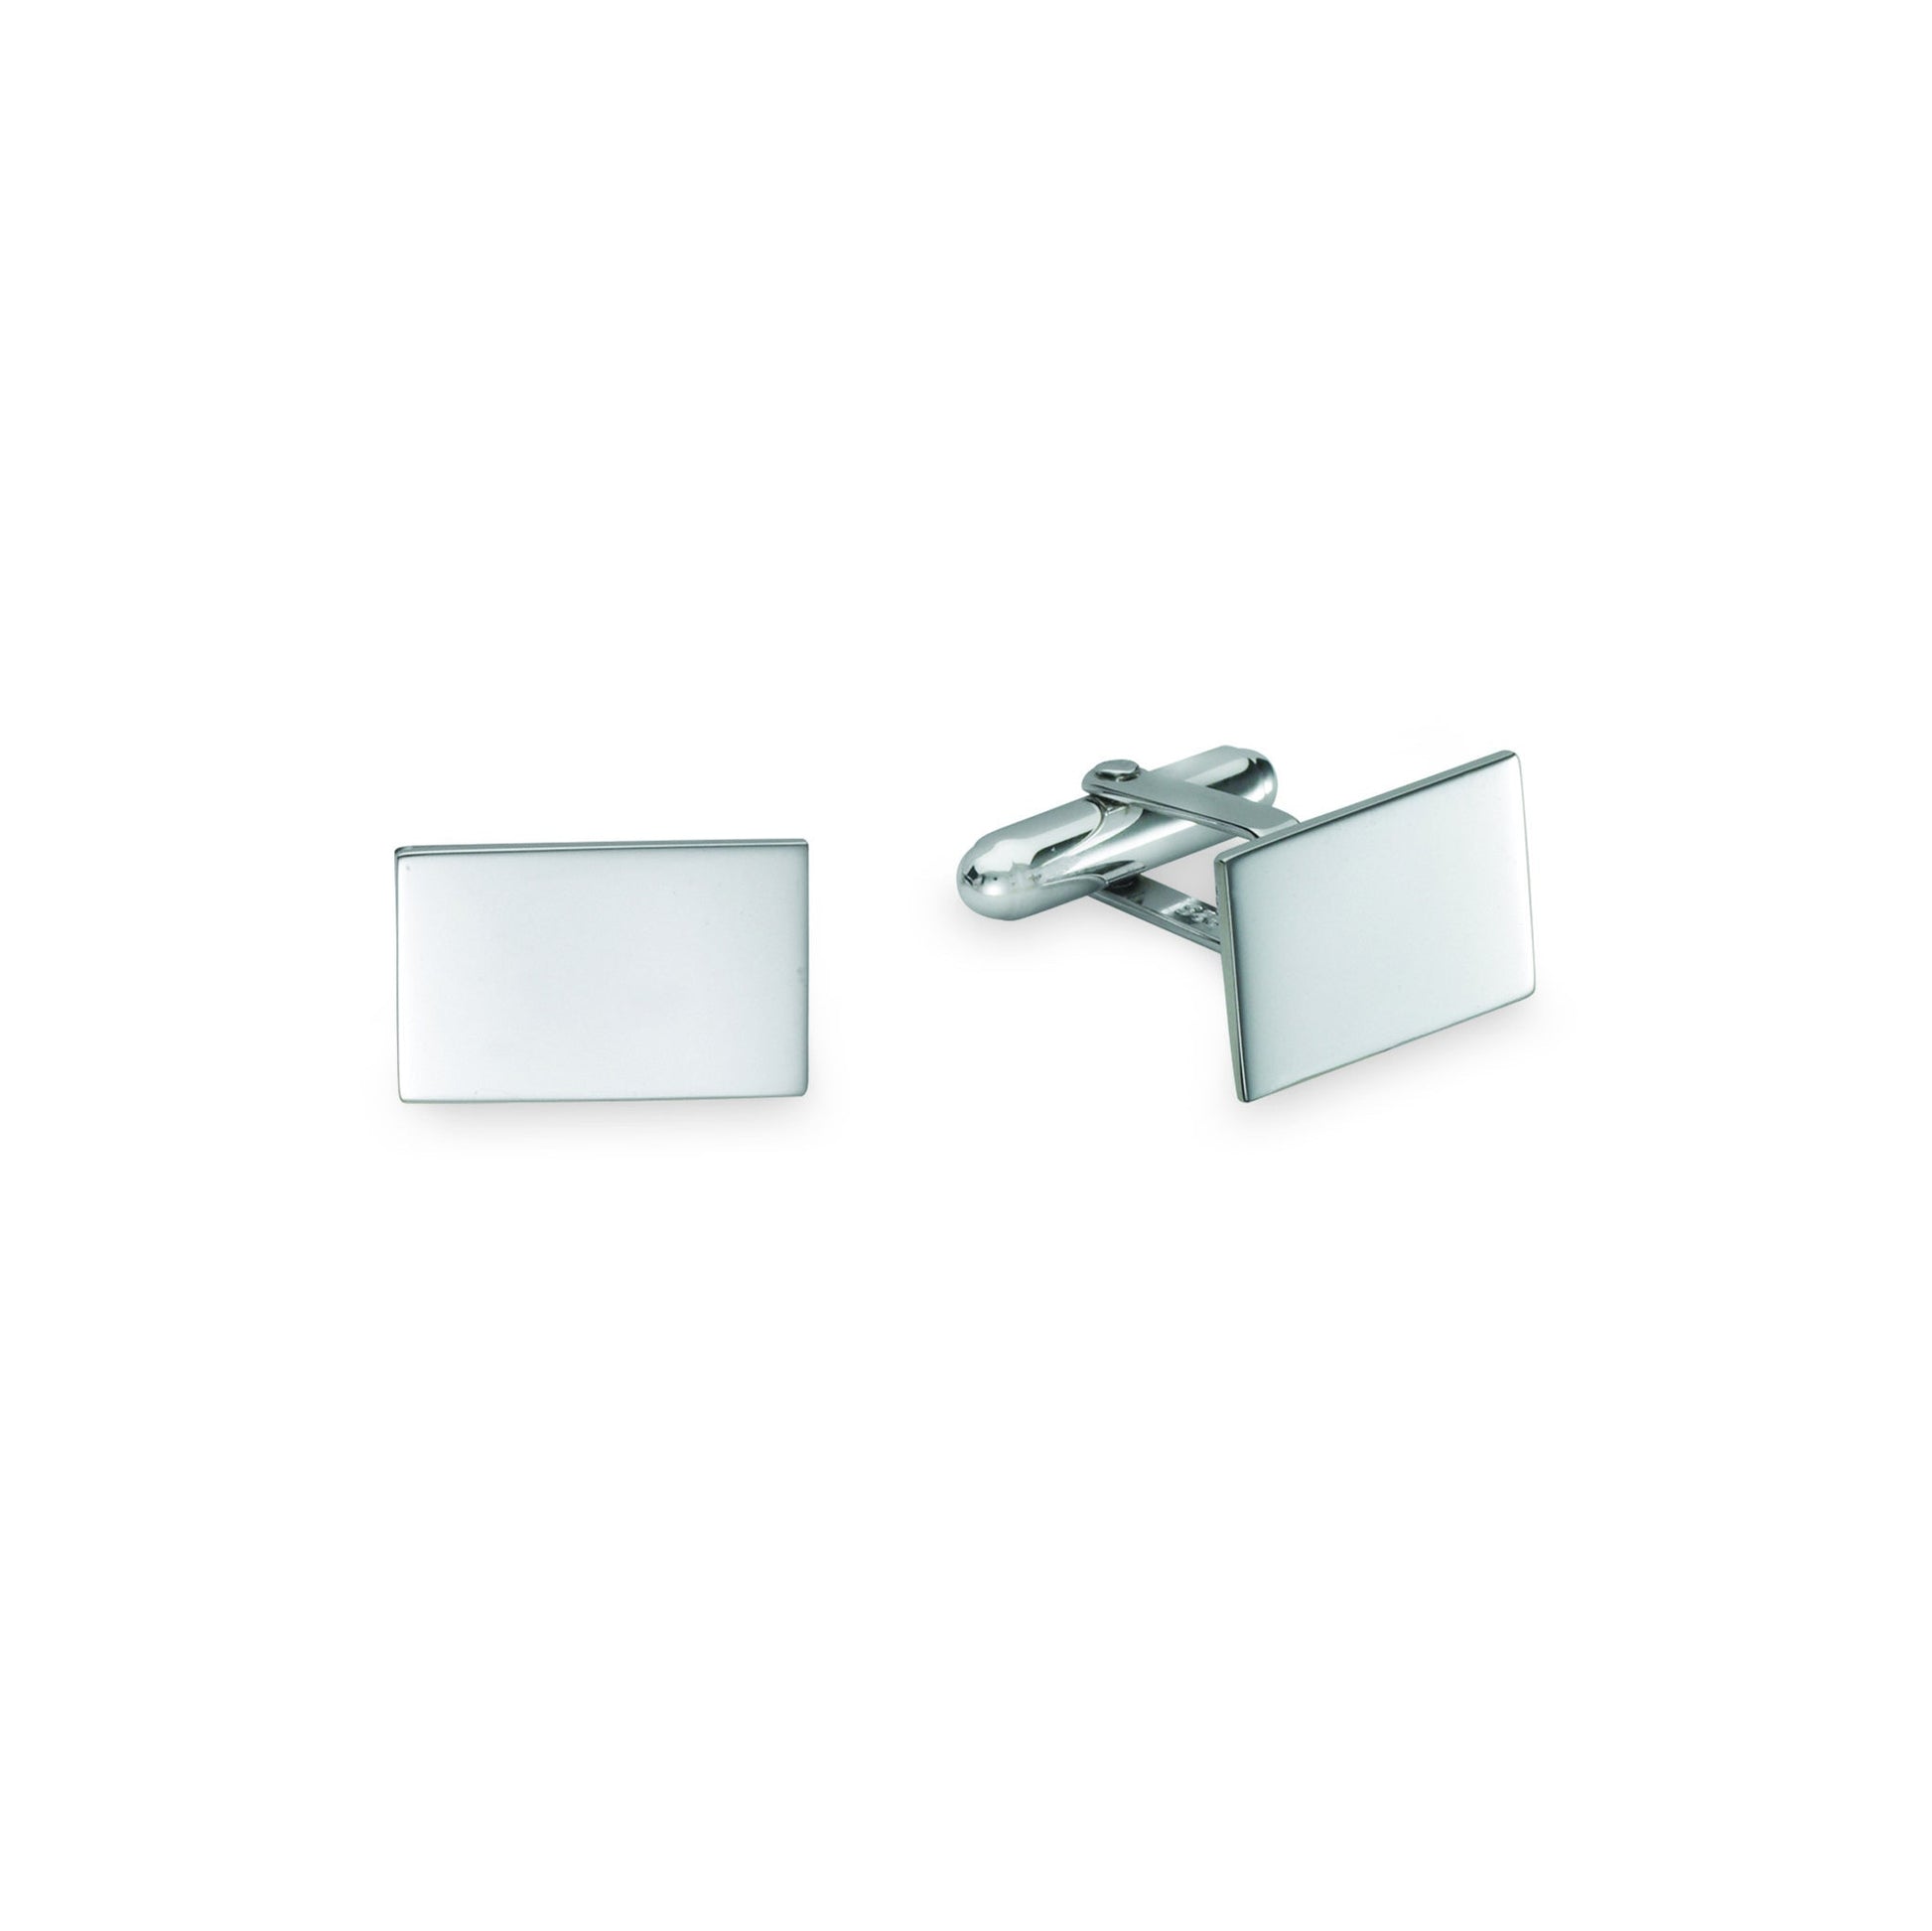 A sterling silver polished rectangle cufflinks displayed on a neutral white background.